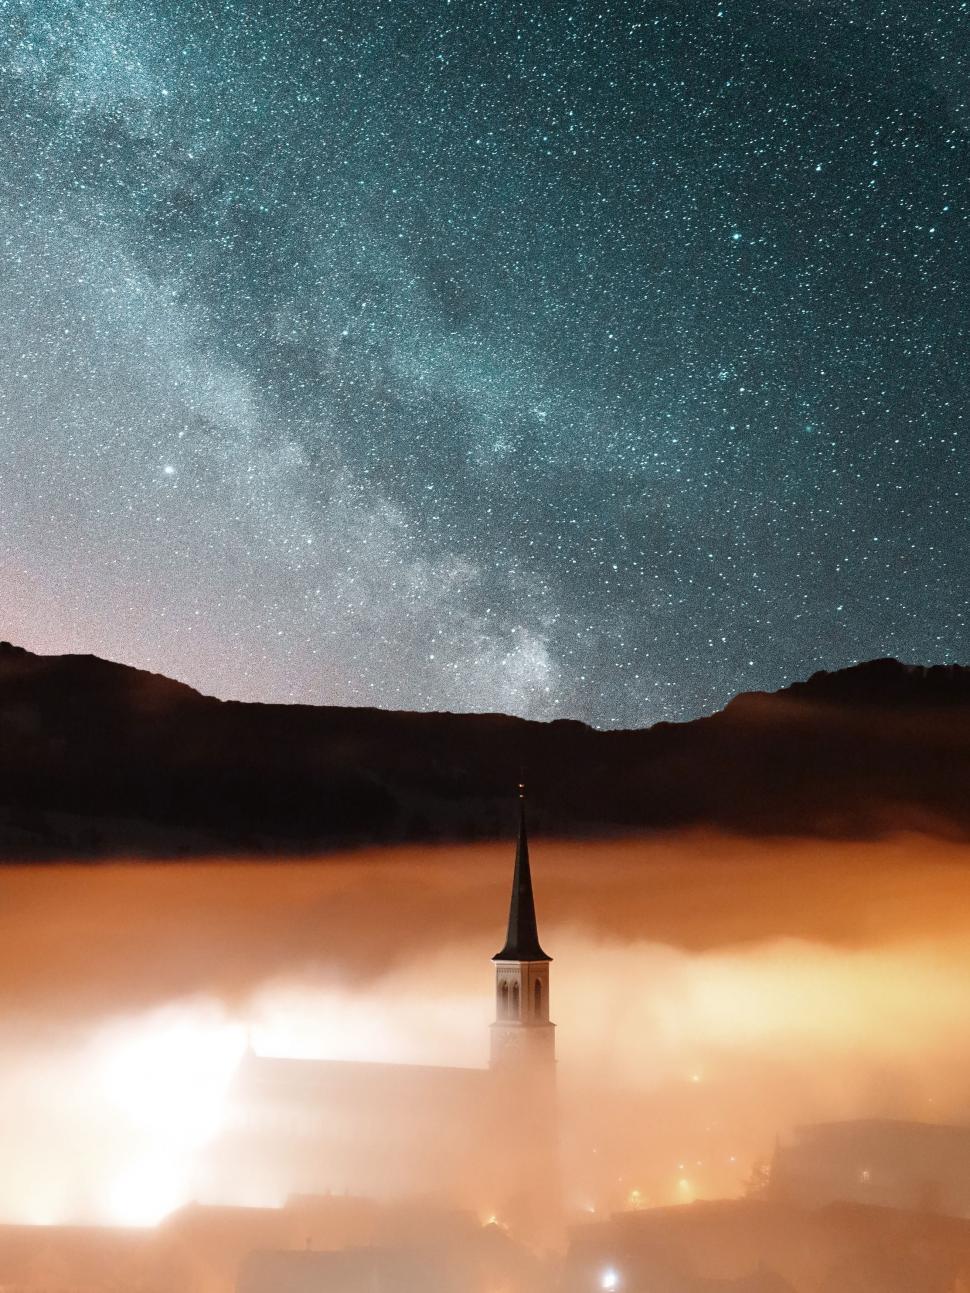 Free Image of Church Floating in Lake Under Starry Night Sky 